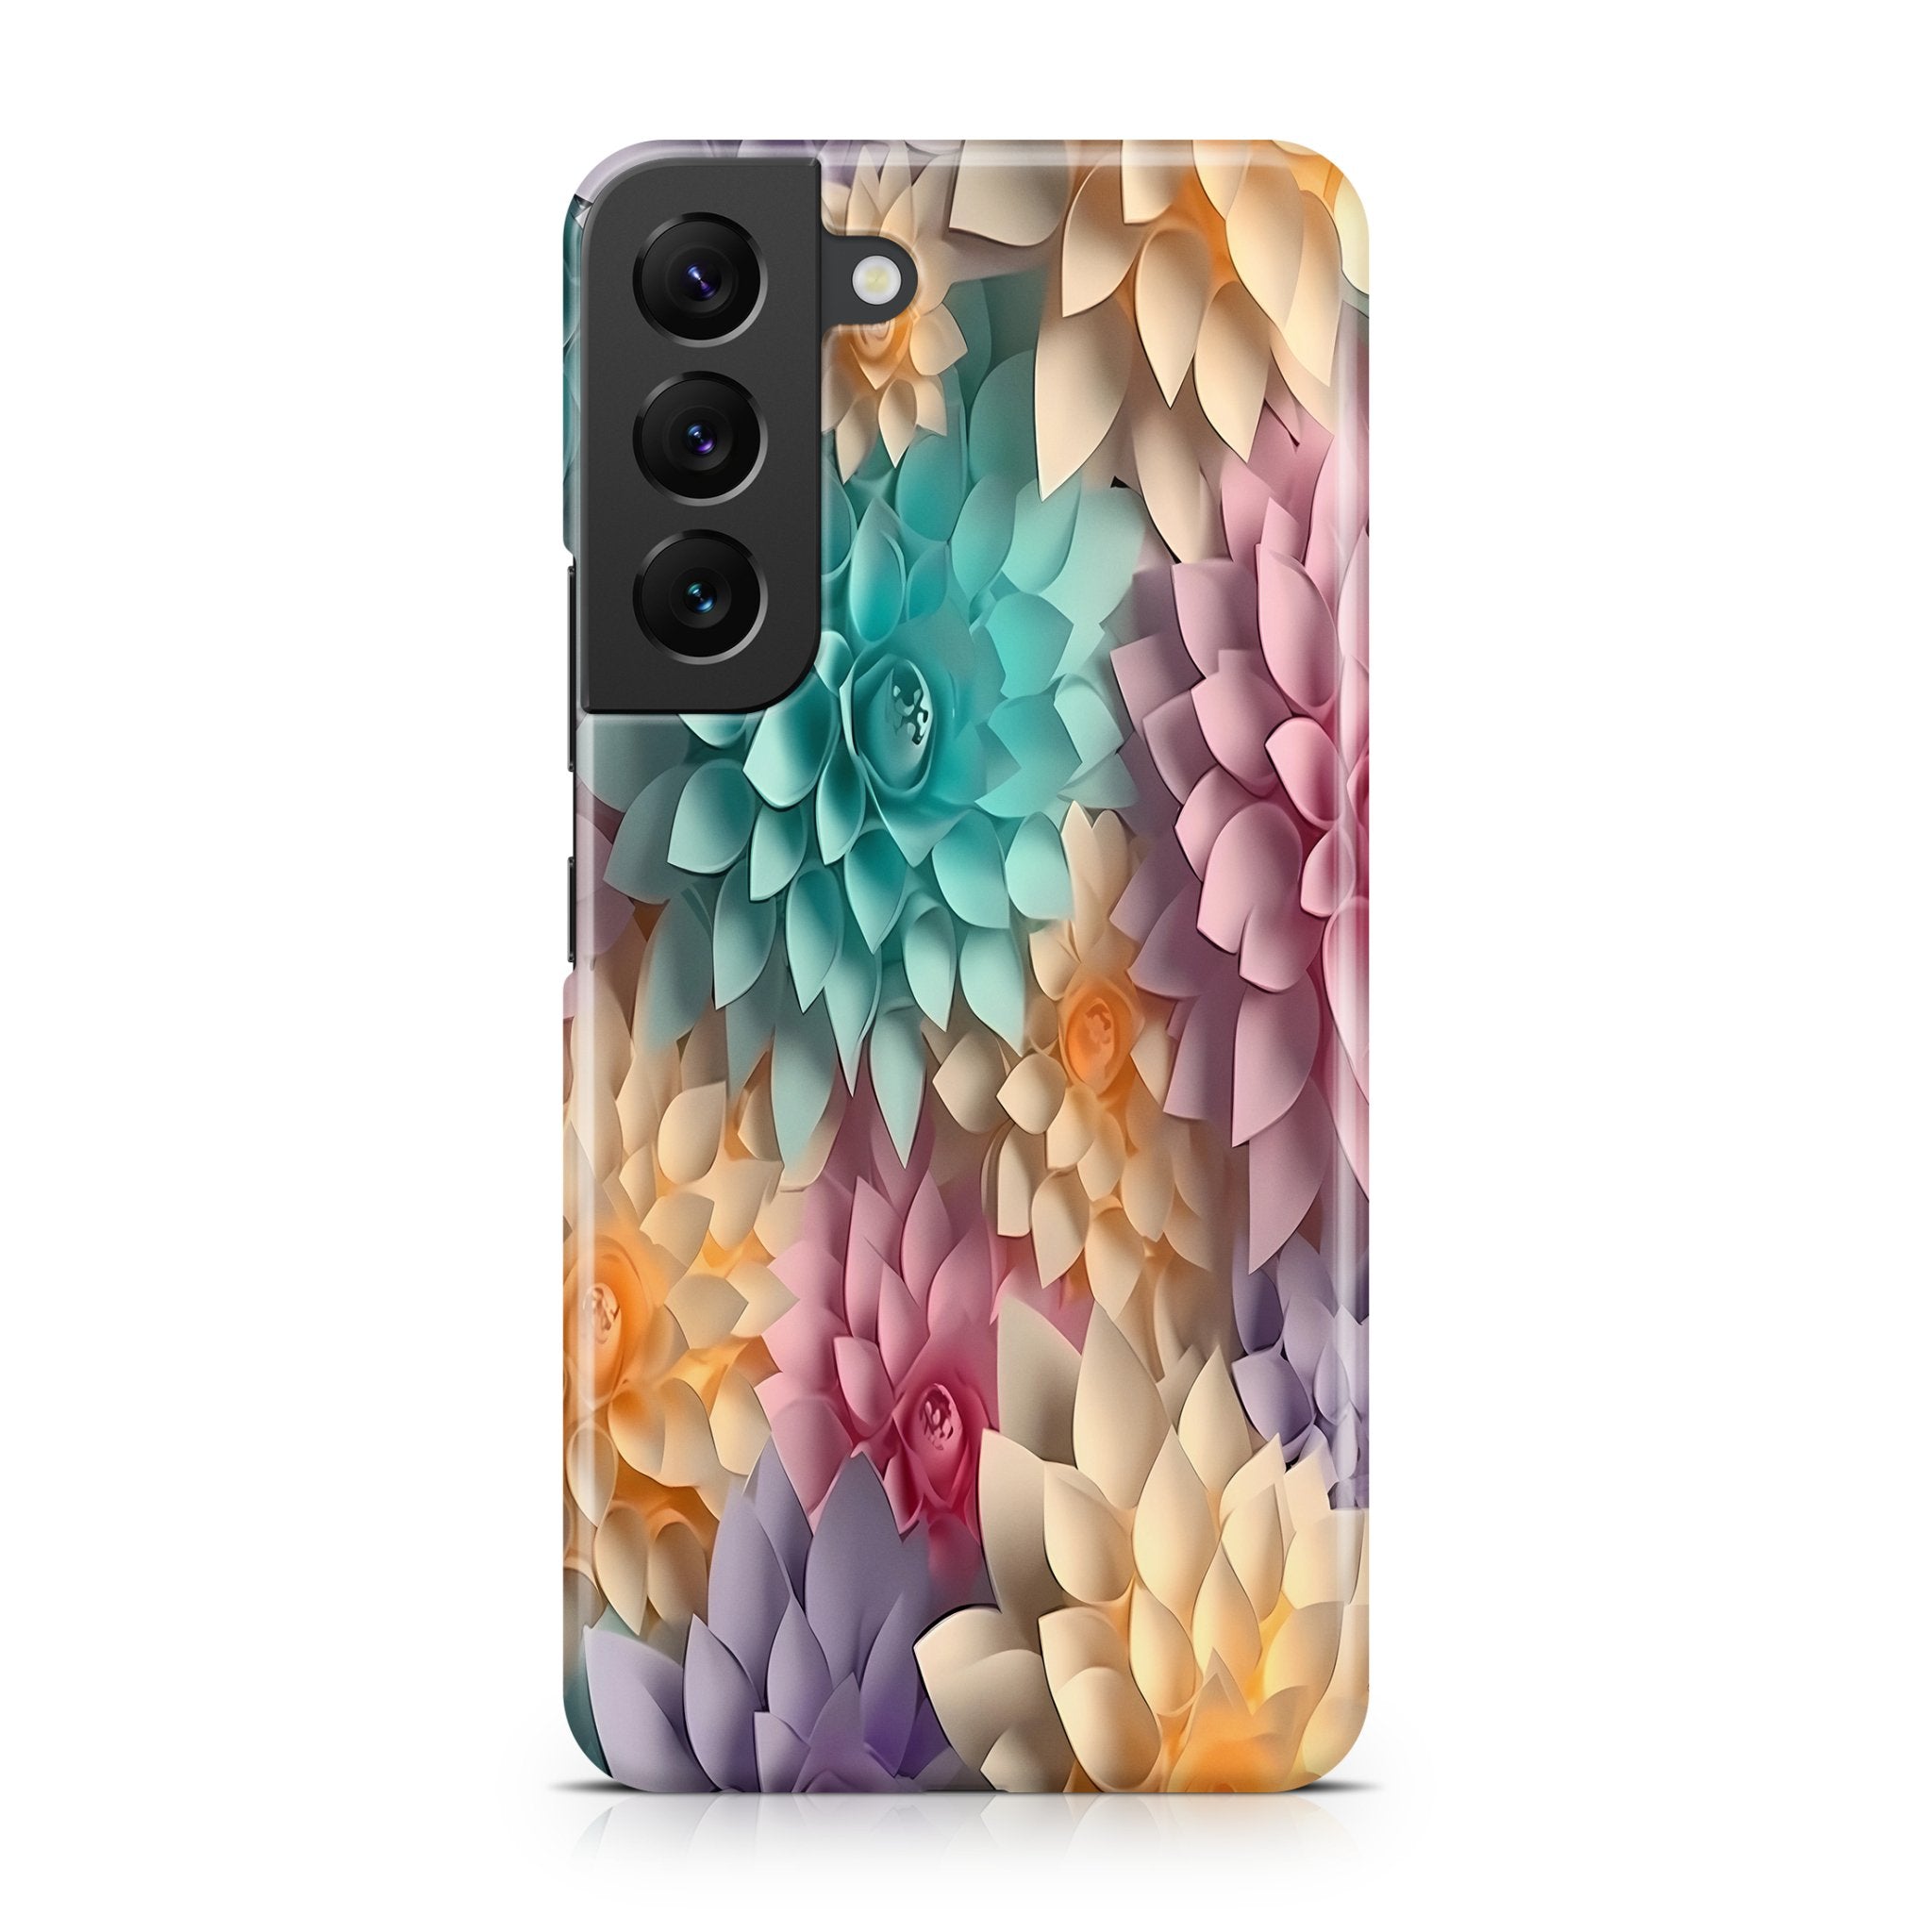 Pastel Symphony - Samsung phone case designs by CaseSwagger